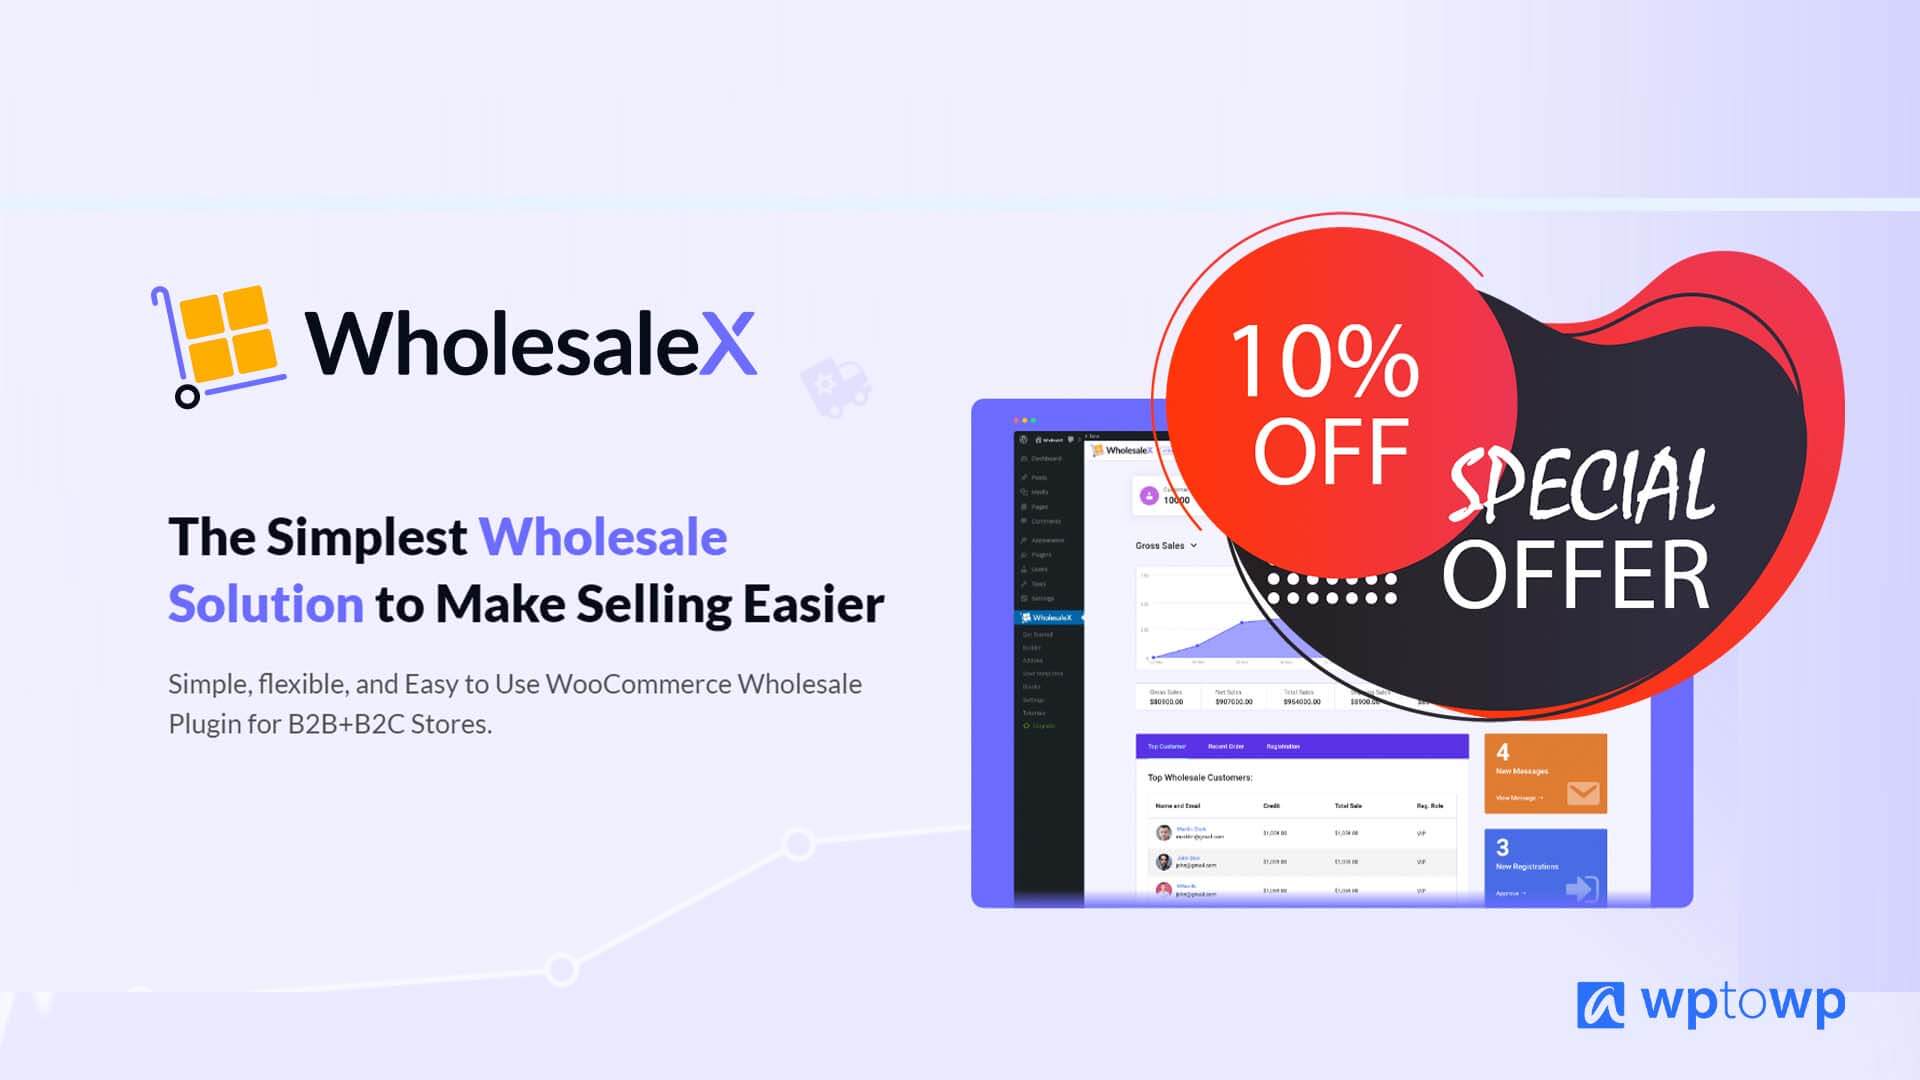 WholesaleX coupon code, Wptowp